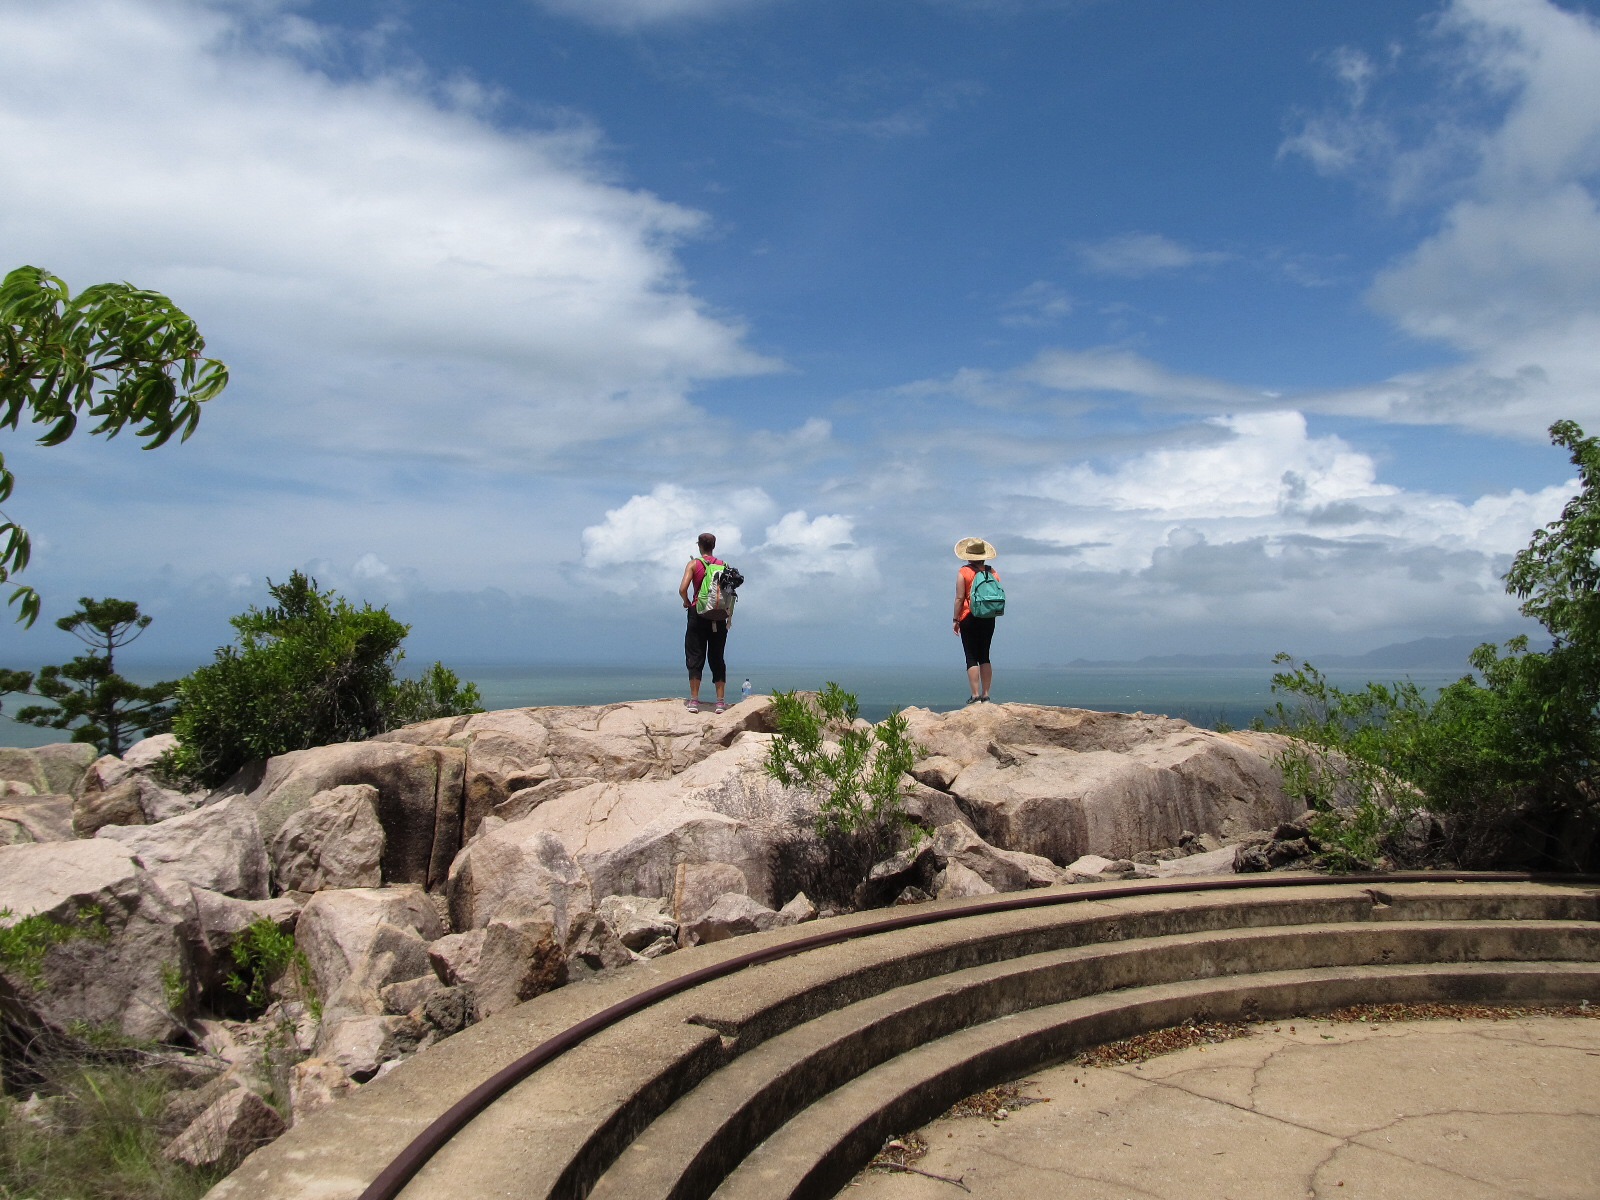 Taking in the spectacular views of Magnetic Island